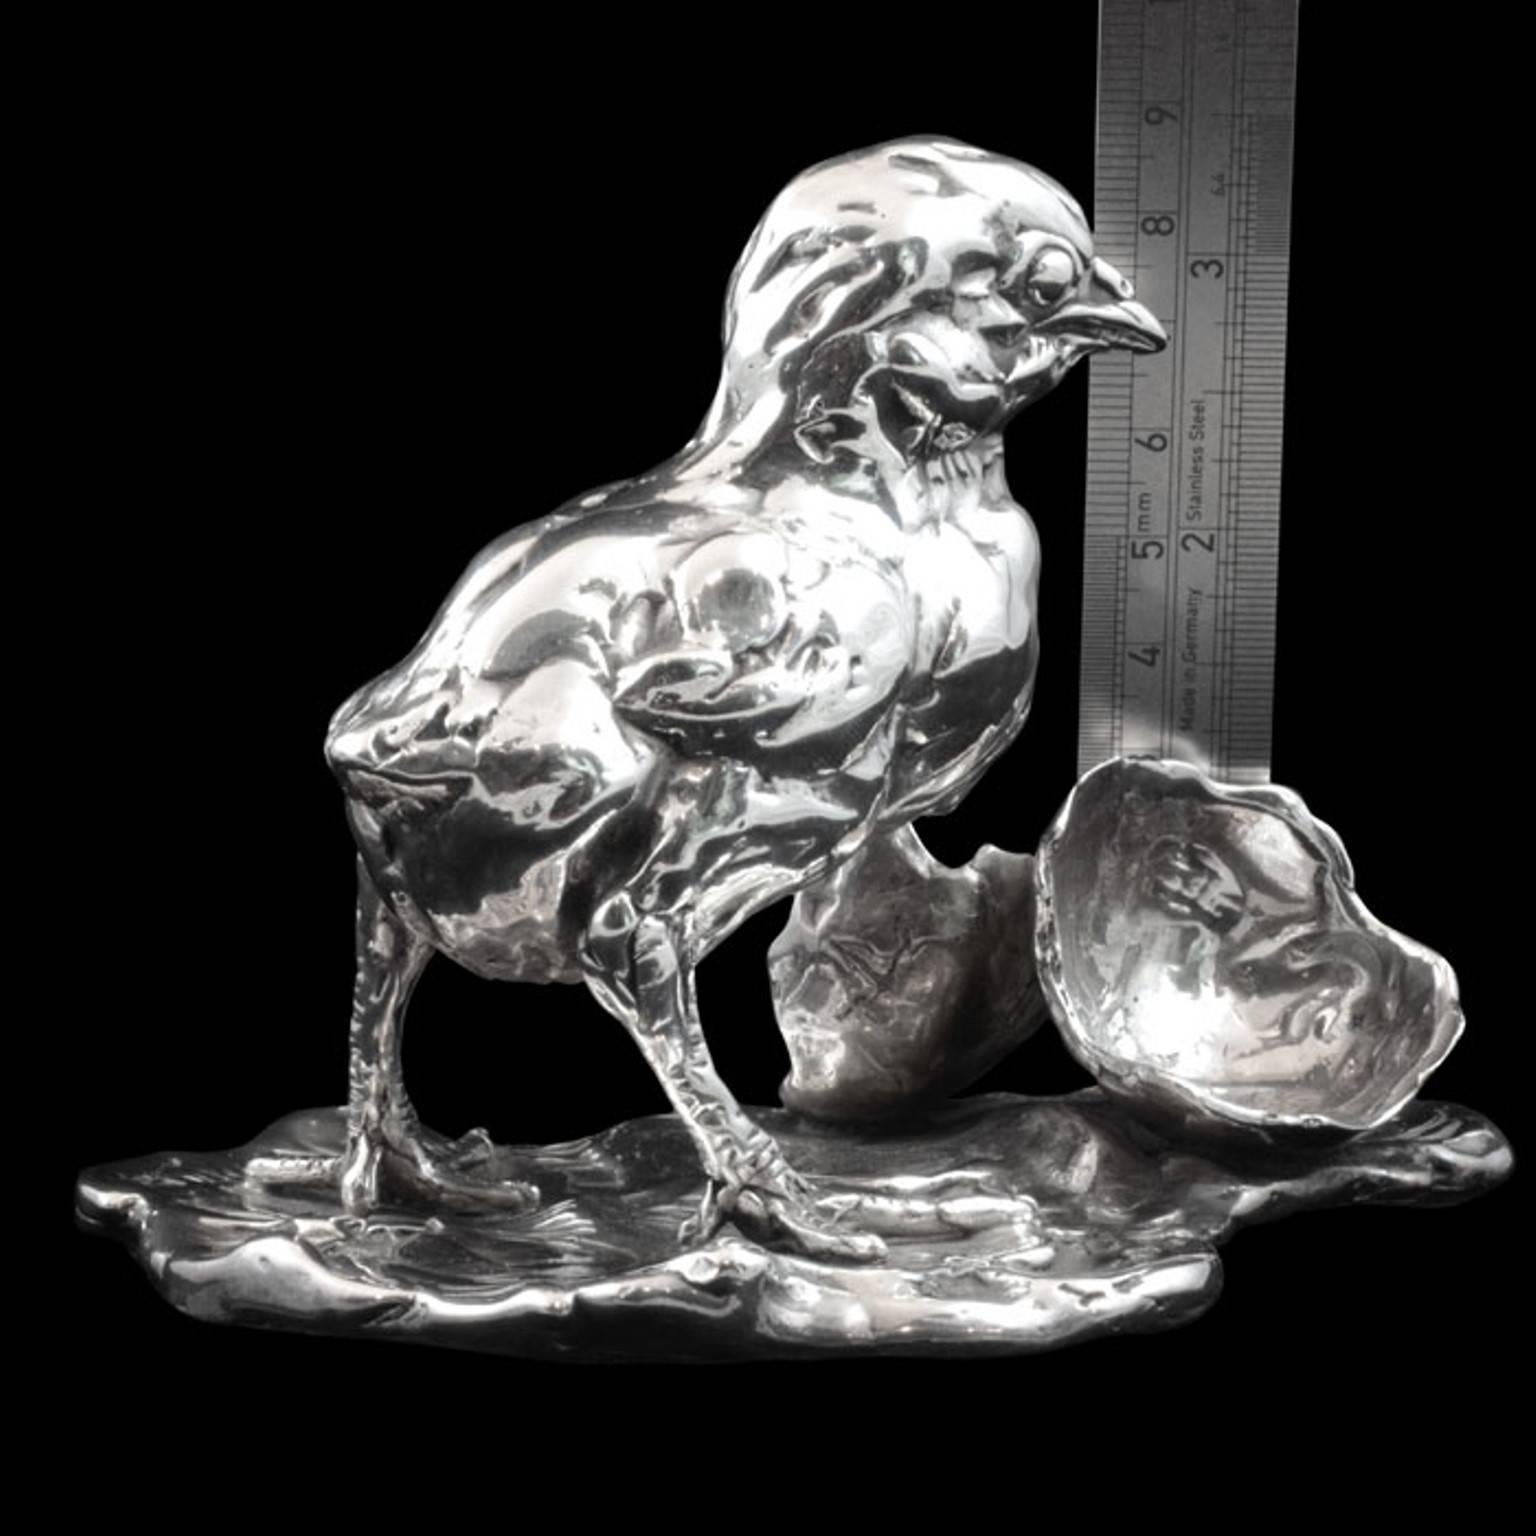  Lucy Kinsella 'Chicken & Egg' Sterling Silver Sculpture 3